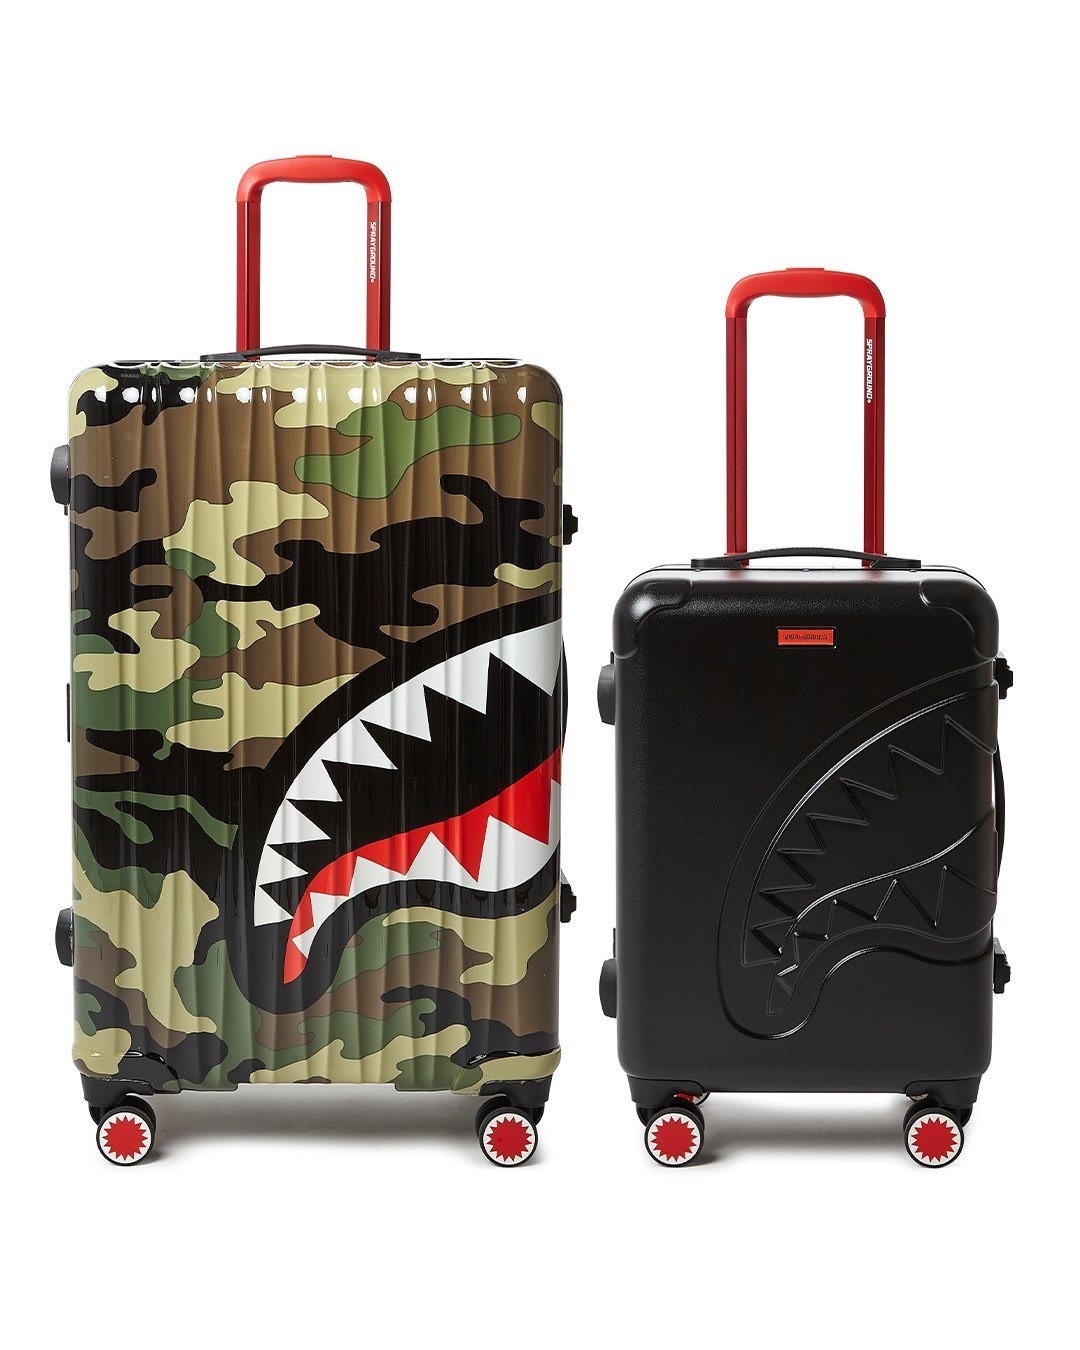 Discount | Full-Size Camo Carry-On Black Luggage Bundle Sprayground Sale - Discount | Full-Size Camo Carry-On Black Luggage Bundle Sprayground Sale-01-0